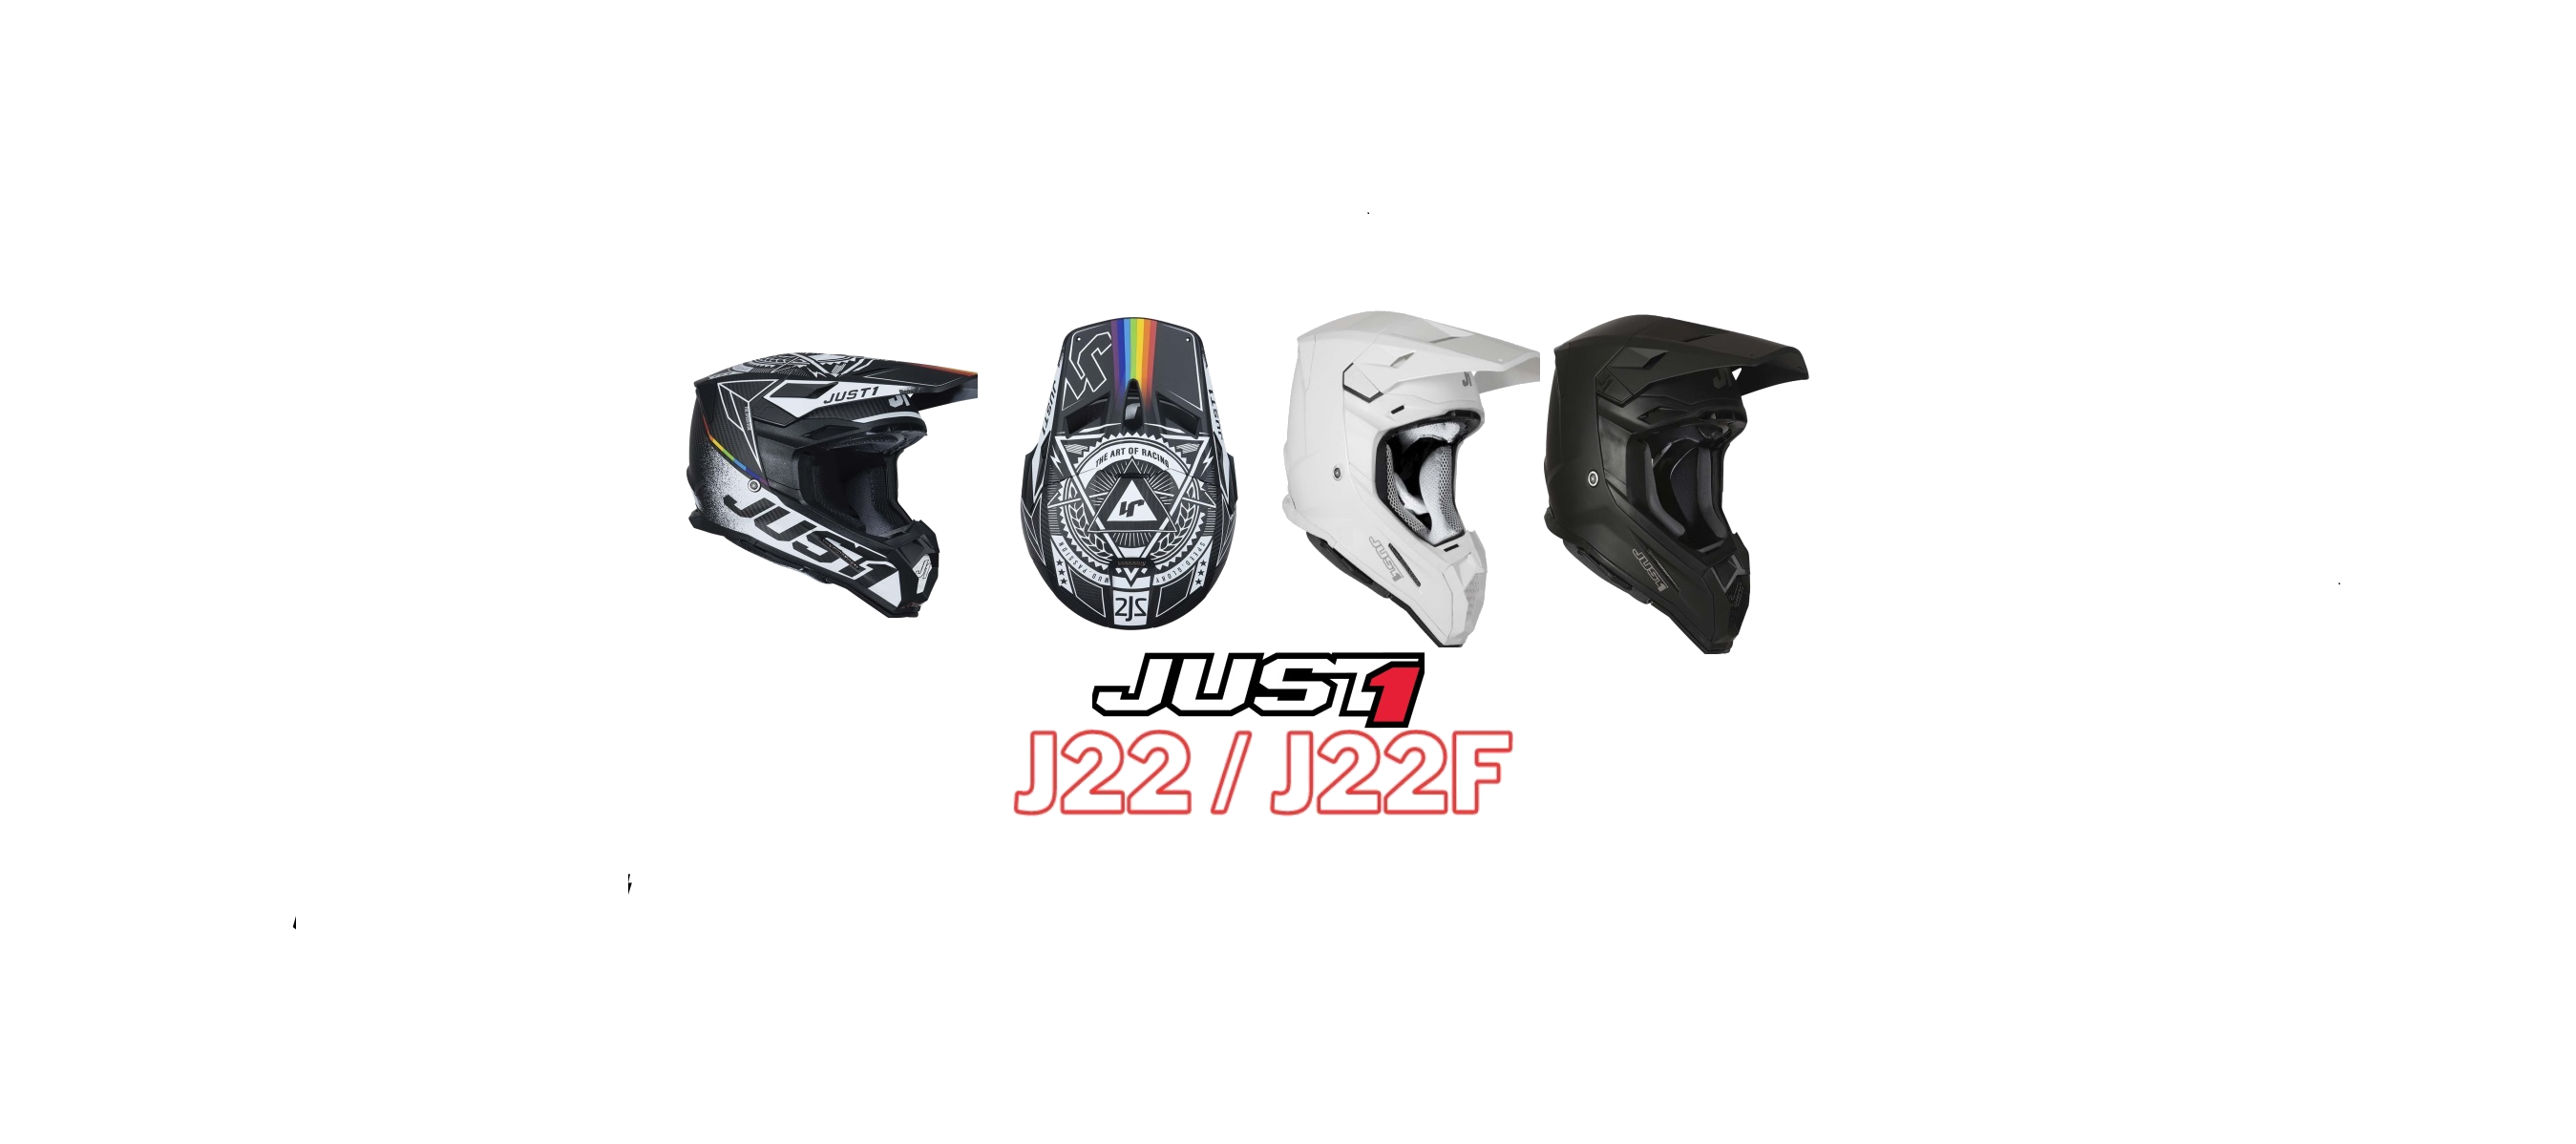 What's The Difference Between the Just1 J22 and J22F Helmets?